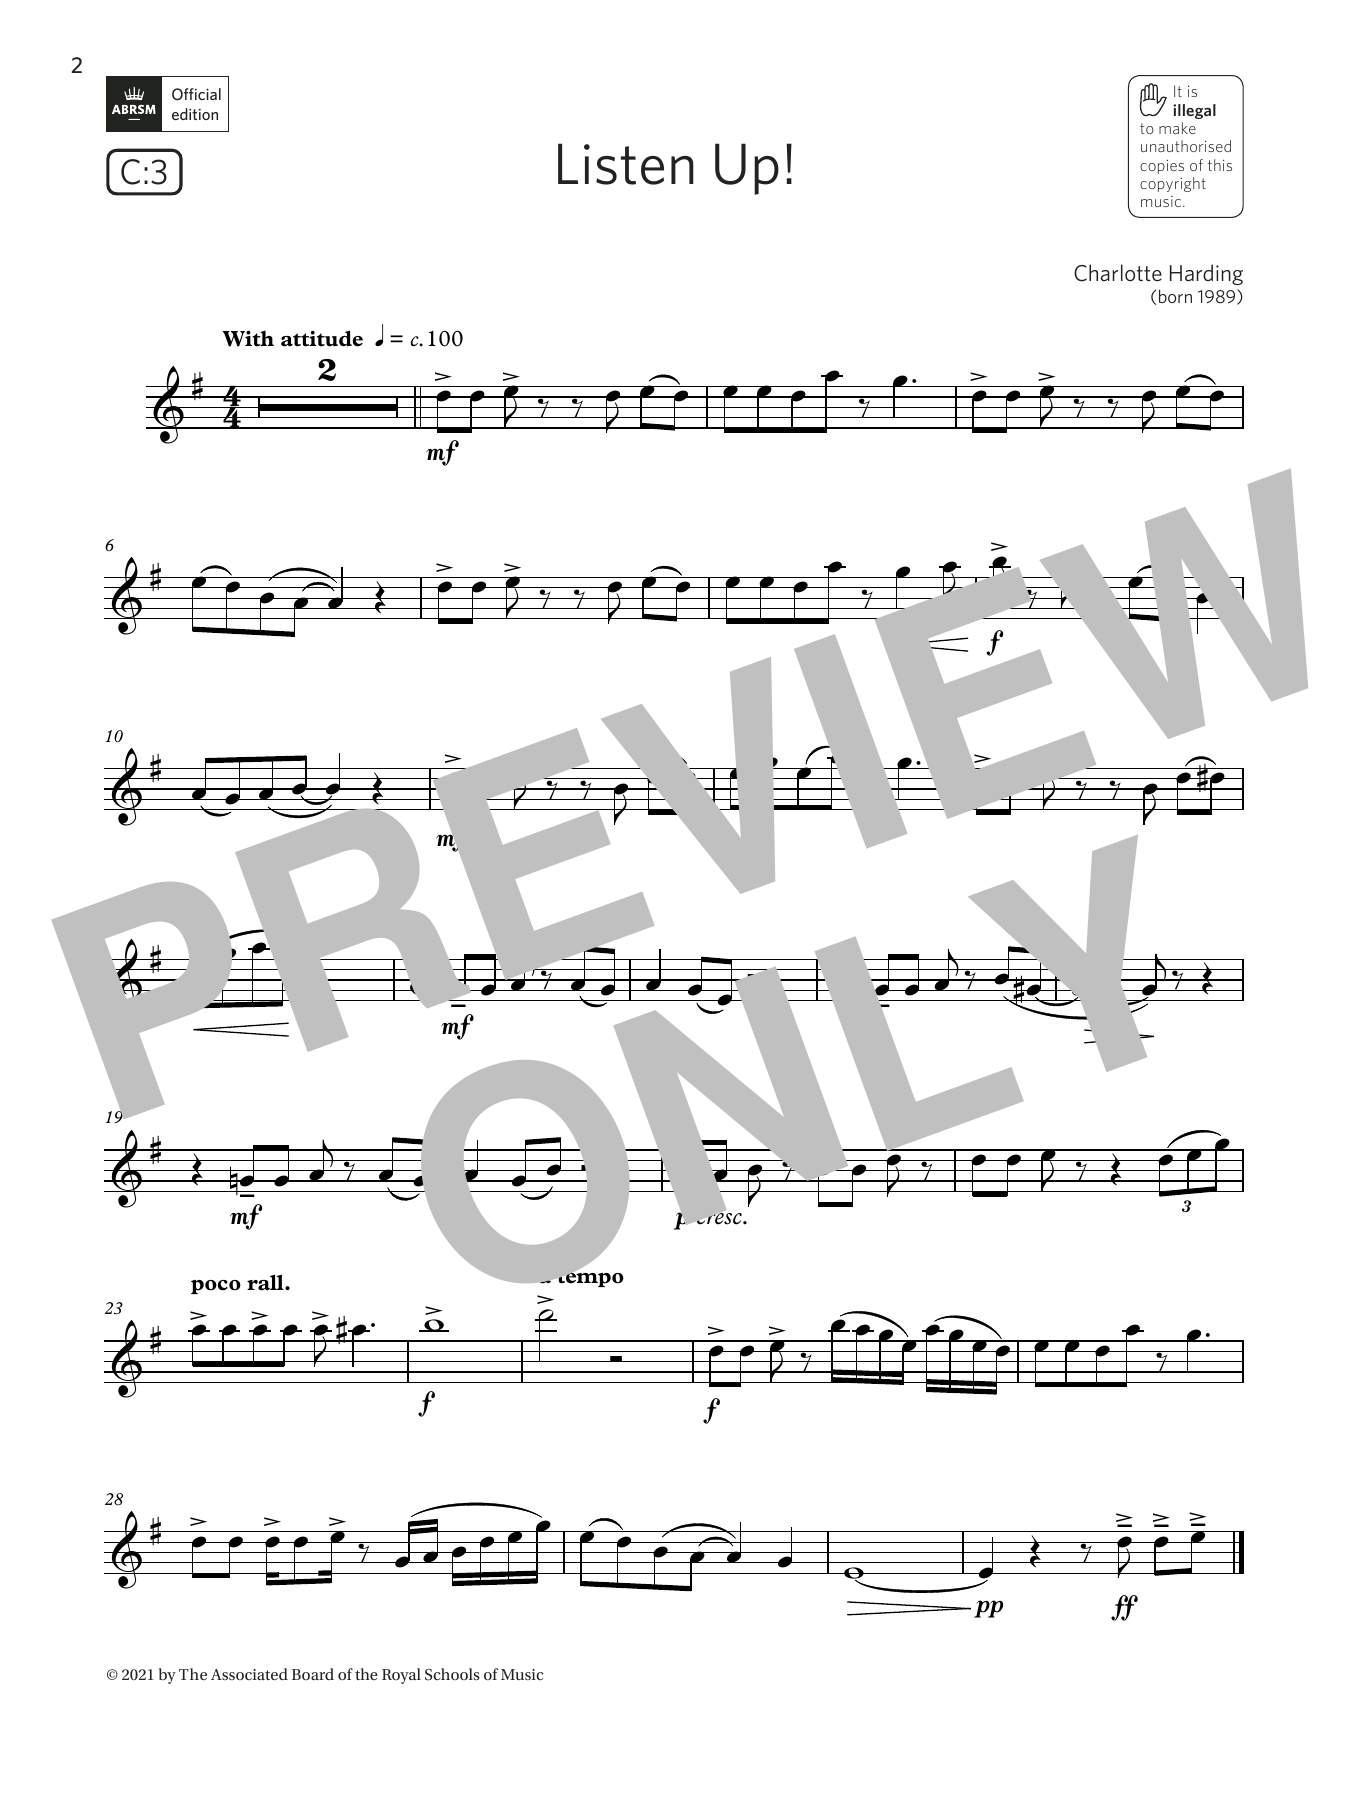 Download Charlotte Harding Listen Up! (Grade 3 List C3 from the AB Sheet Music